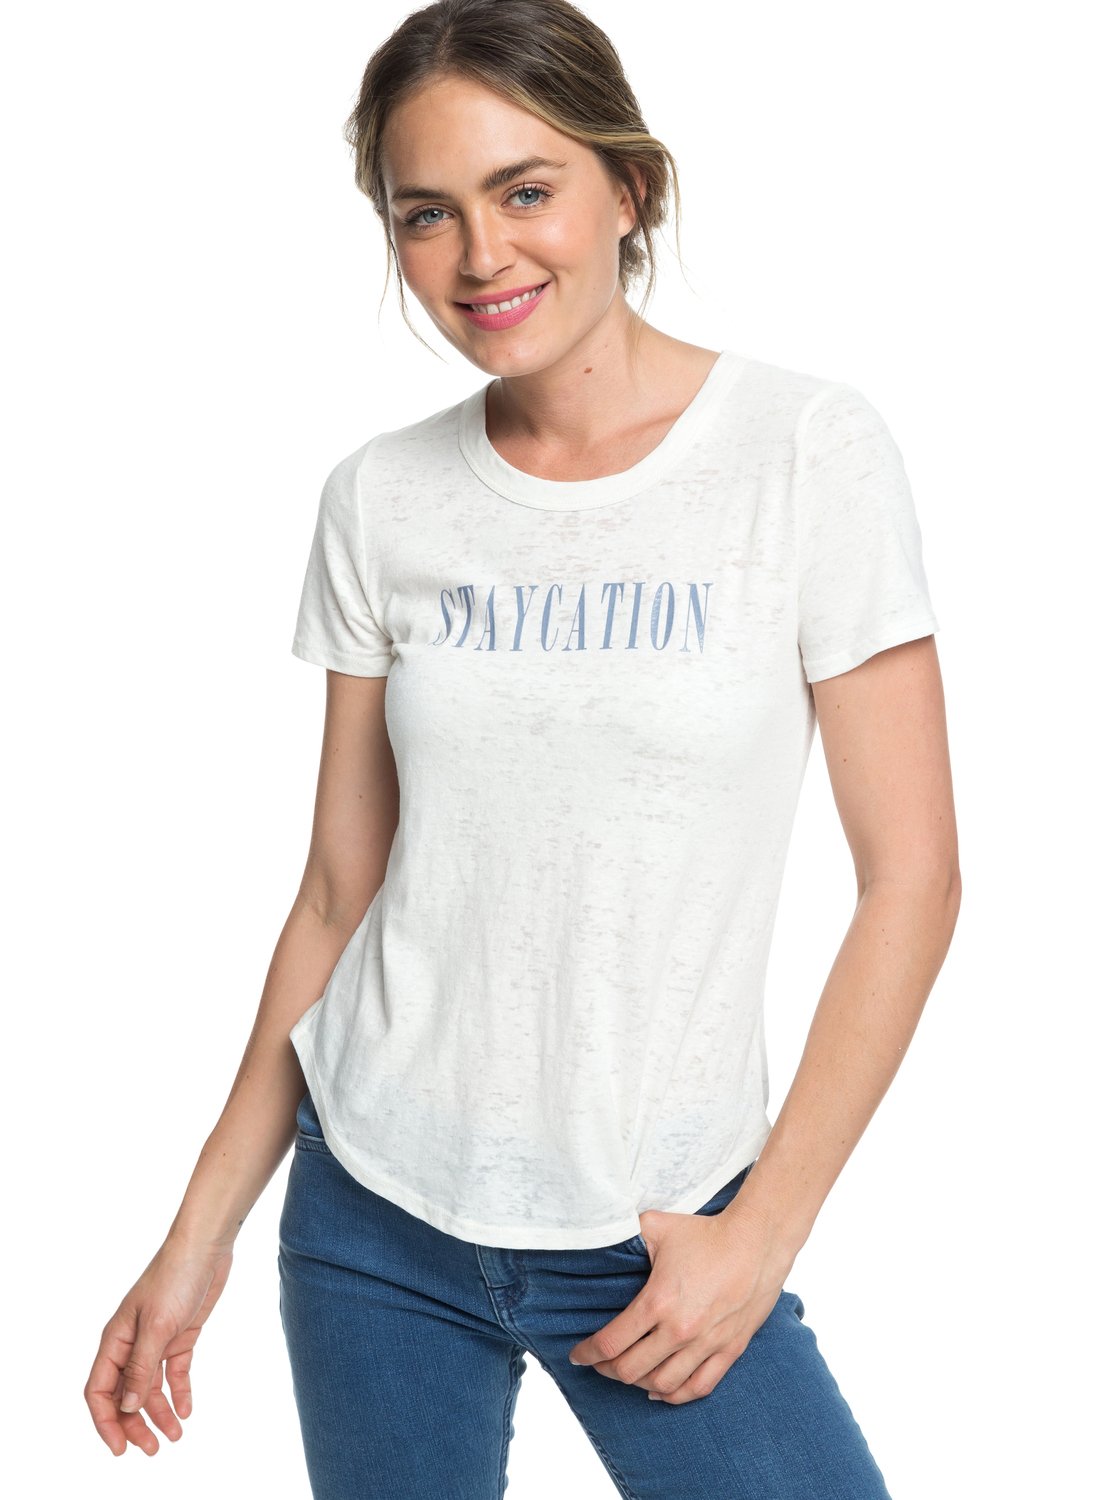 Staycation Tee